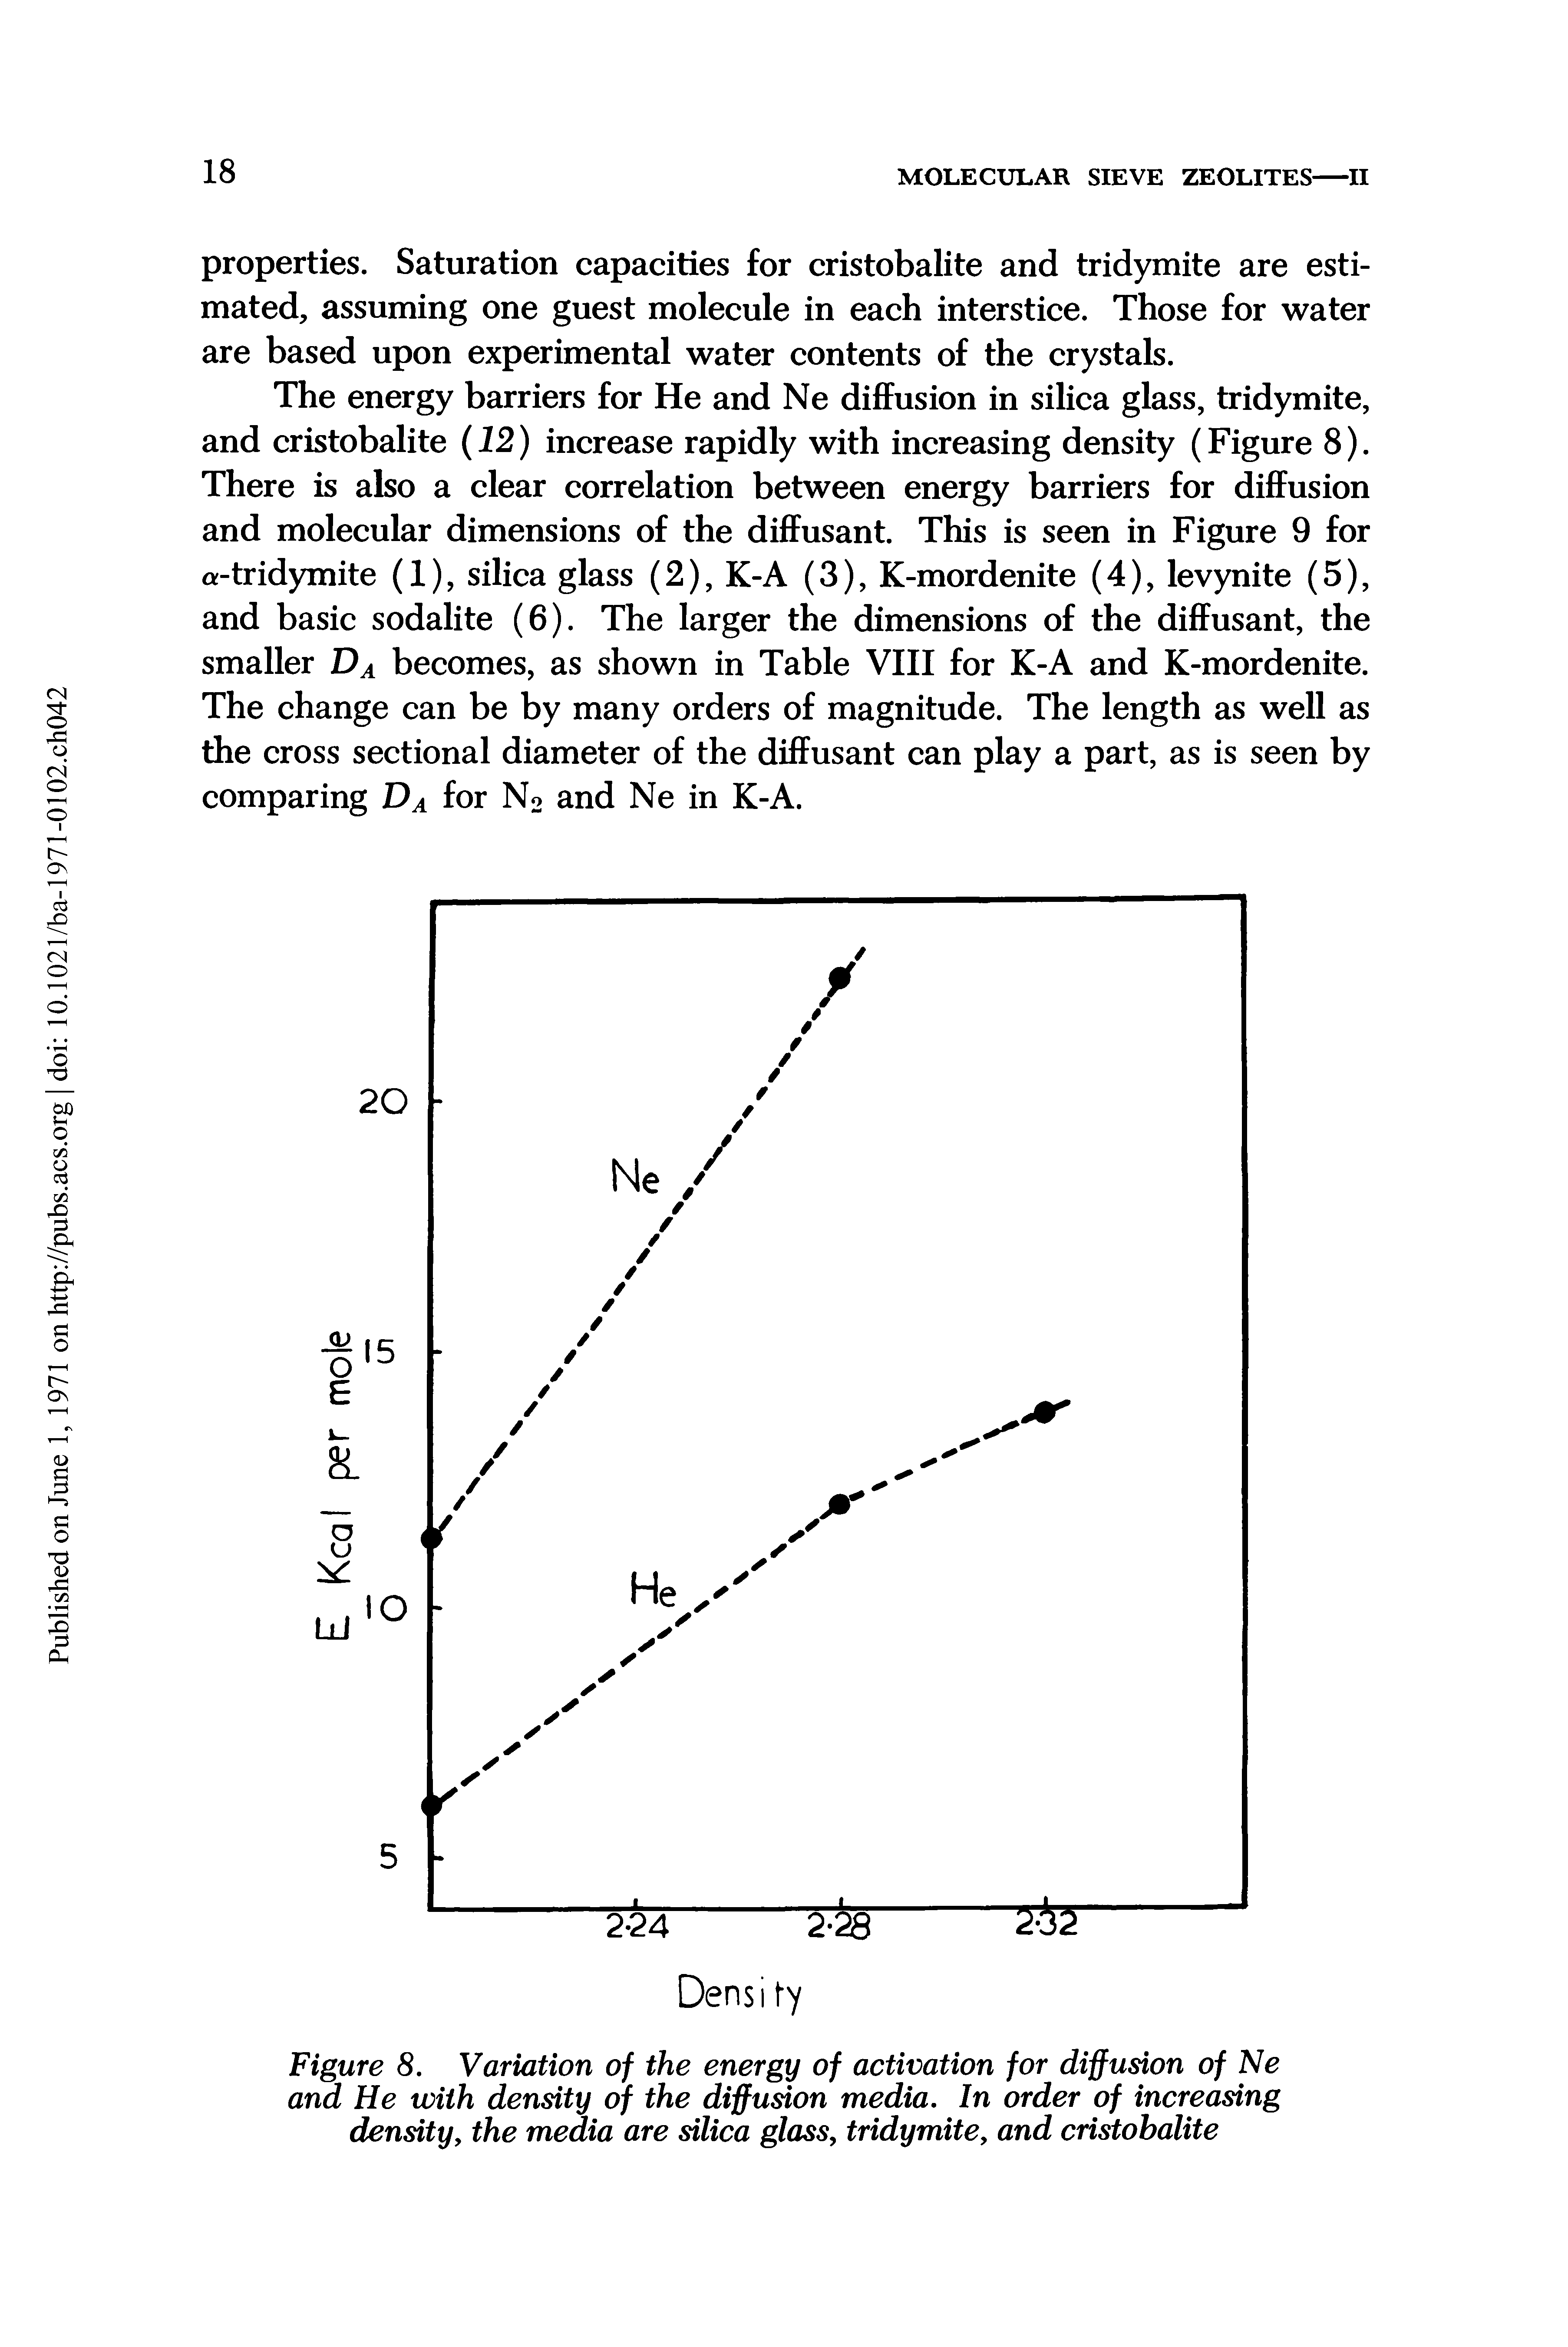 Figure 8. Variation of the energy of activation for diffusion of Ne arid He with density of the diffusion media. In order of increasing densityy the media are silica glass, tridymite, and cristobalite...